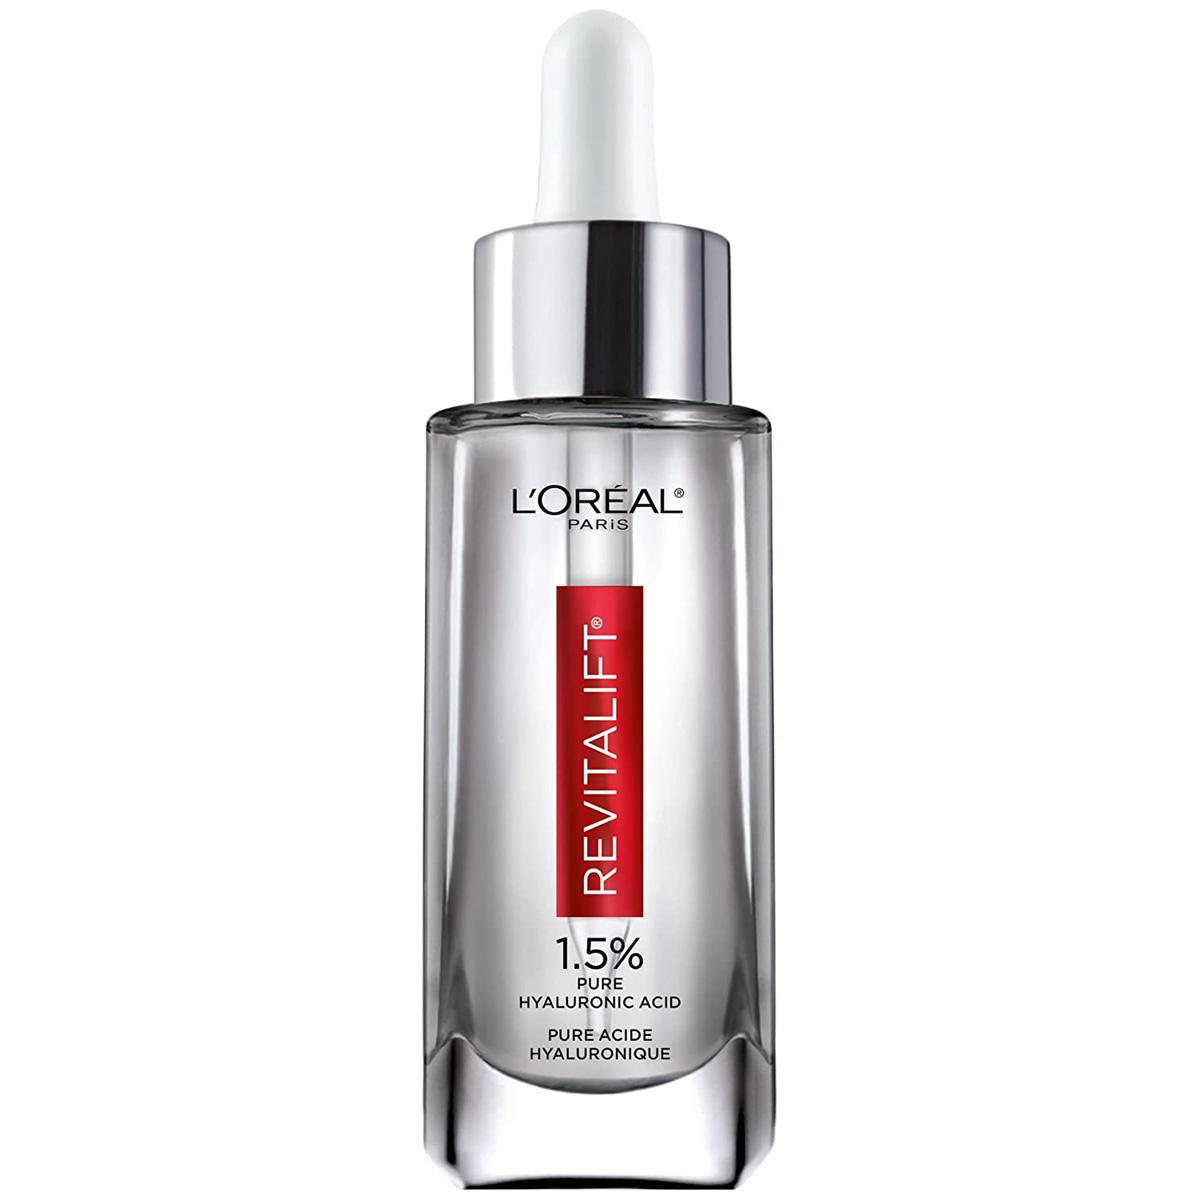 LOreal Paris Pure Hyaluronic Acid Serum for Face for $9.71 Shipped